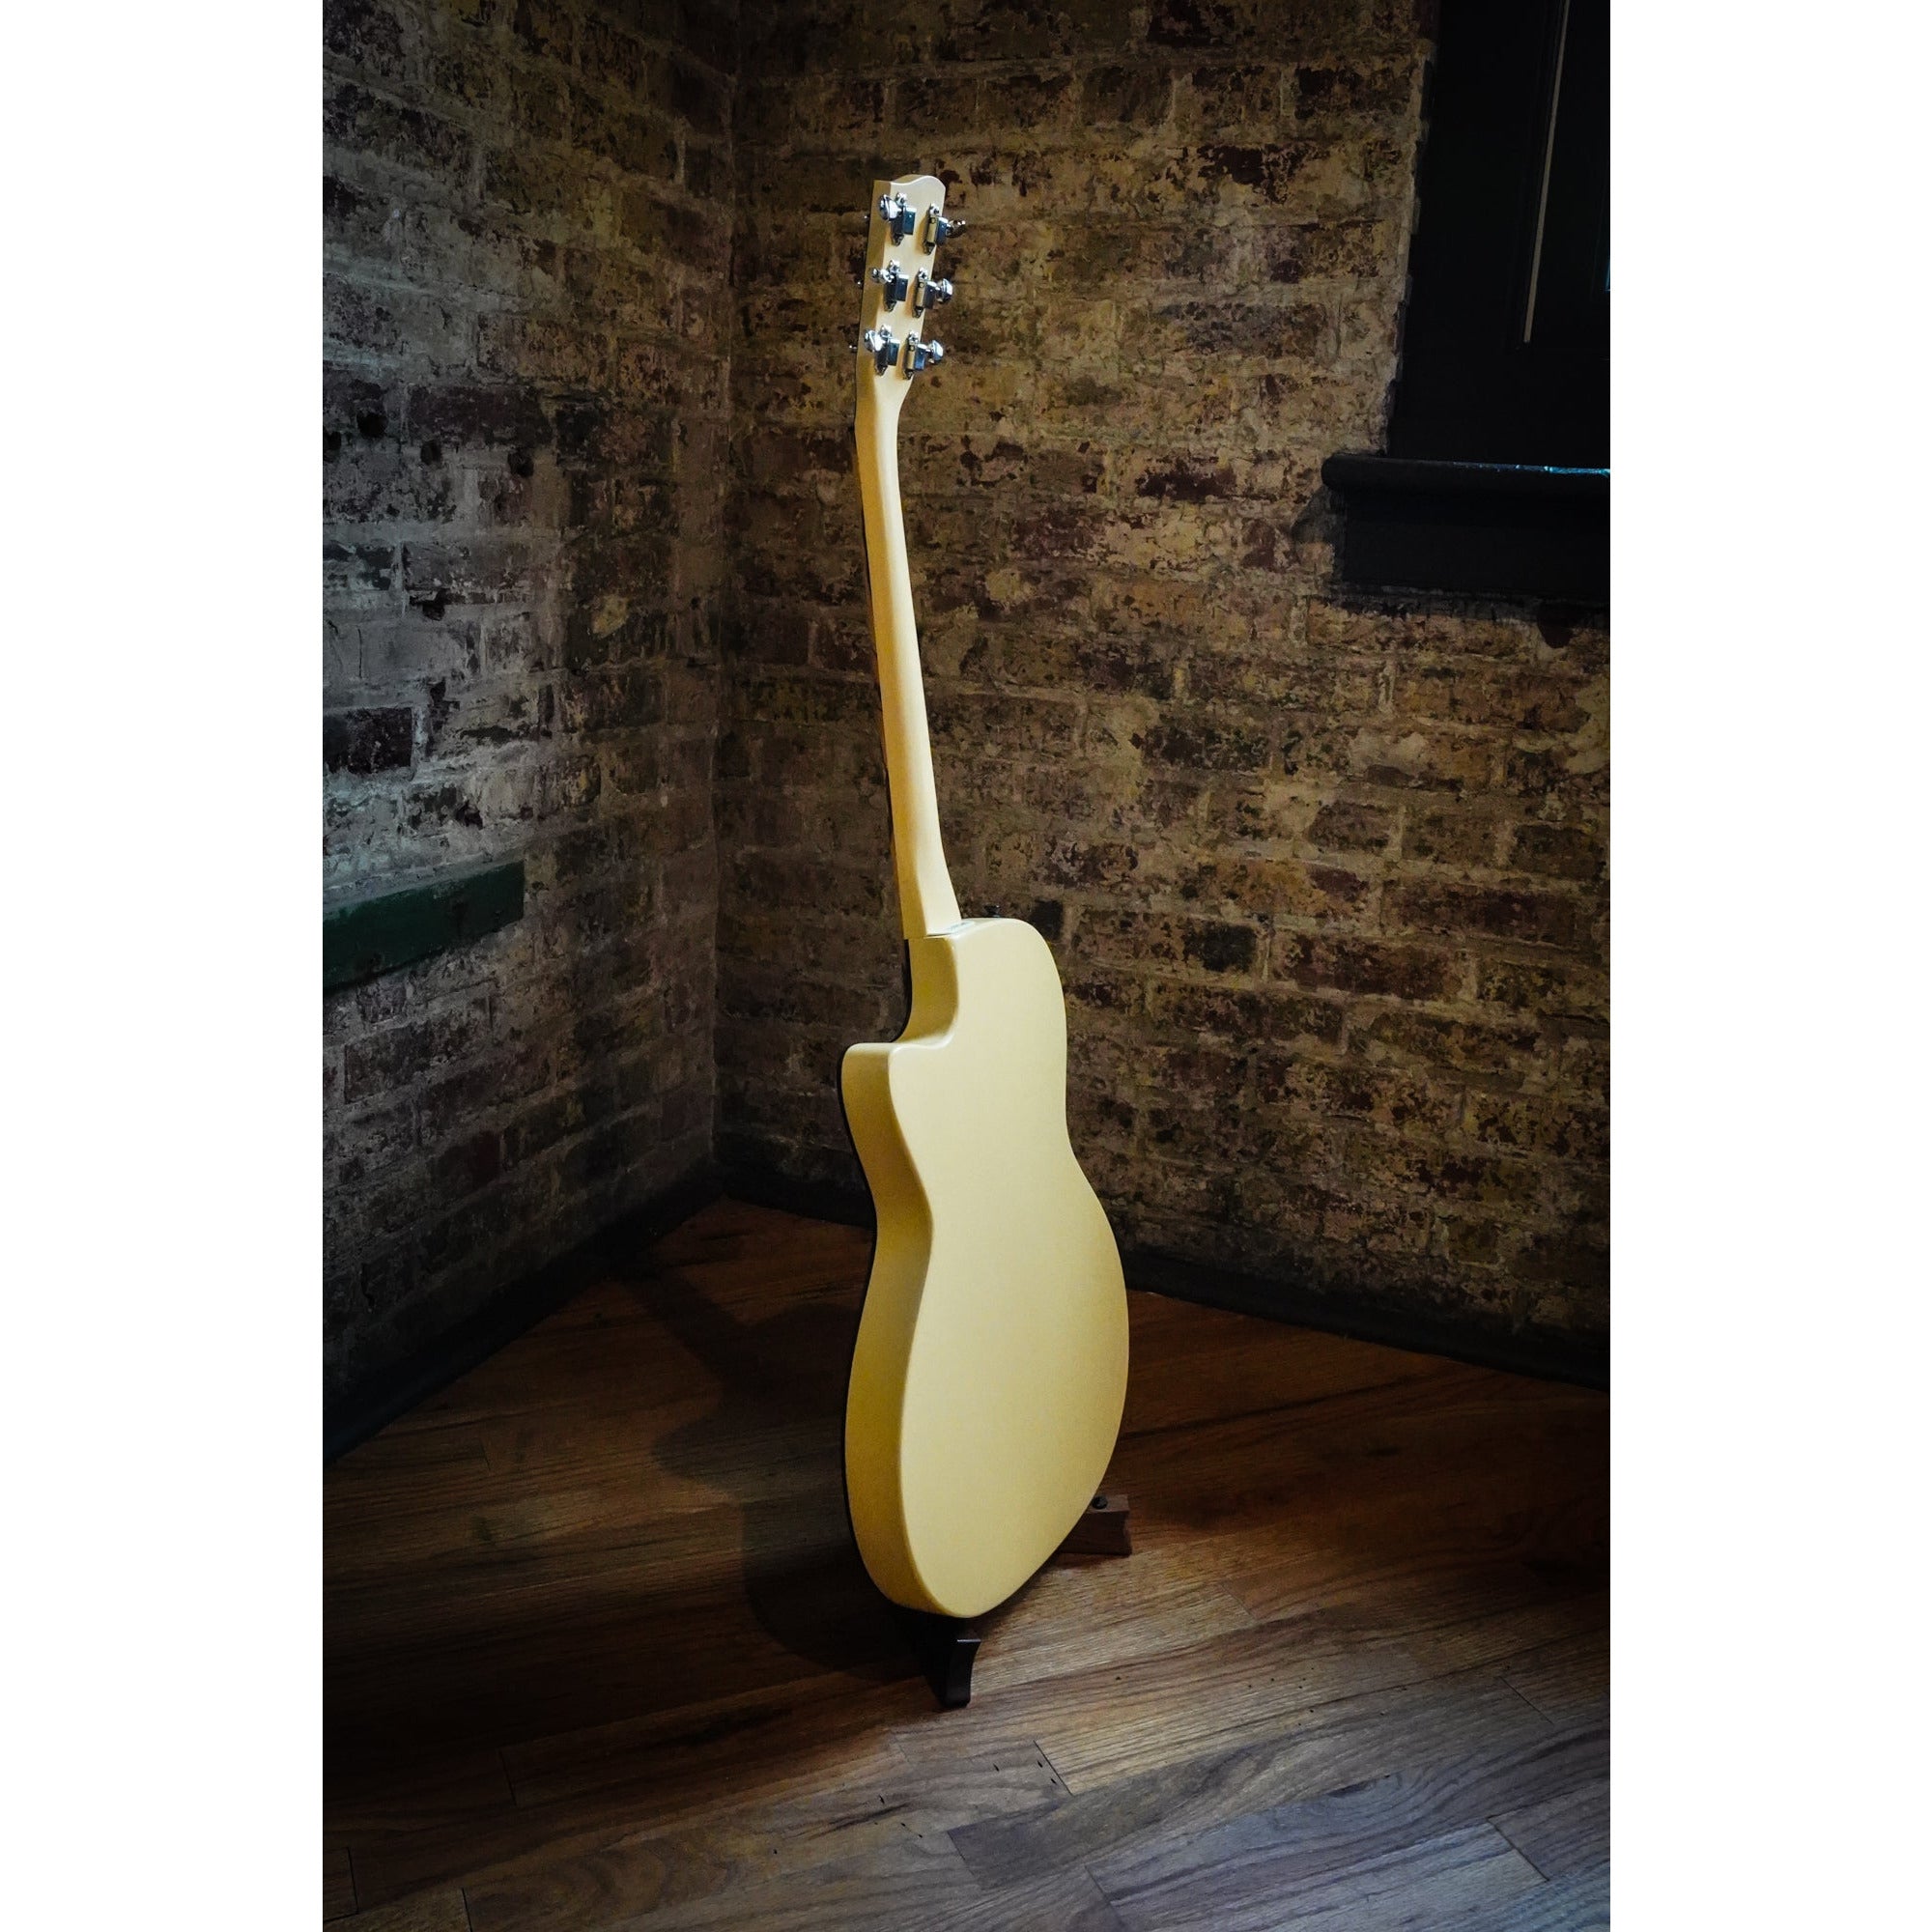 Teel Guitar Works L00C Ultra-Thin AE - TV Yellow - The Sound Parcel